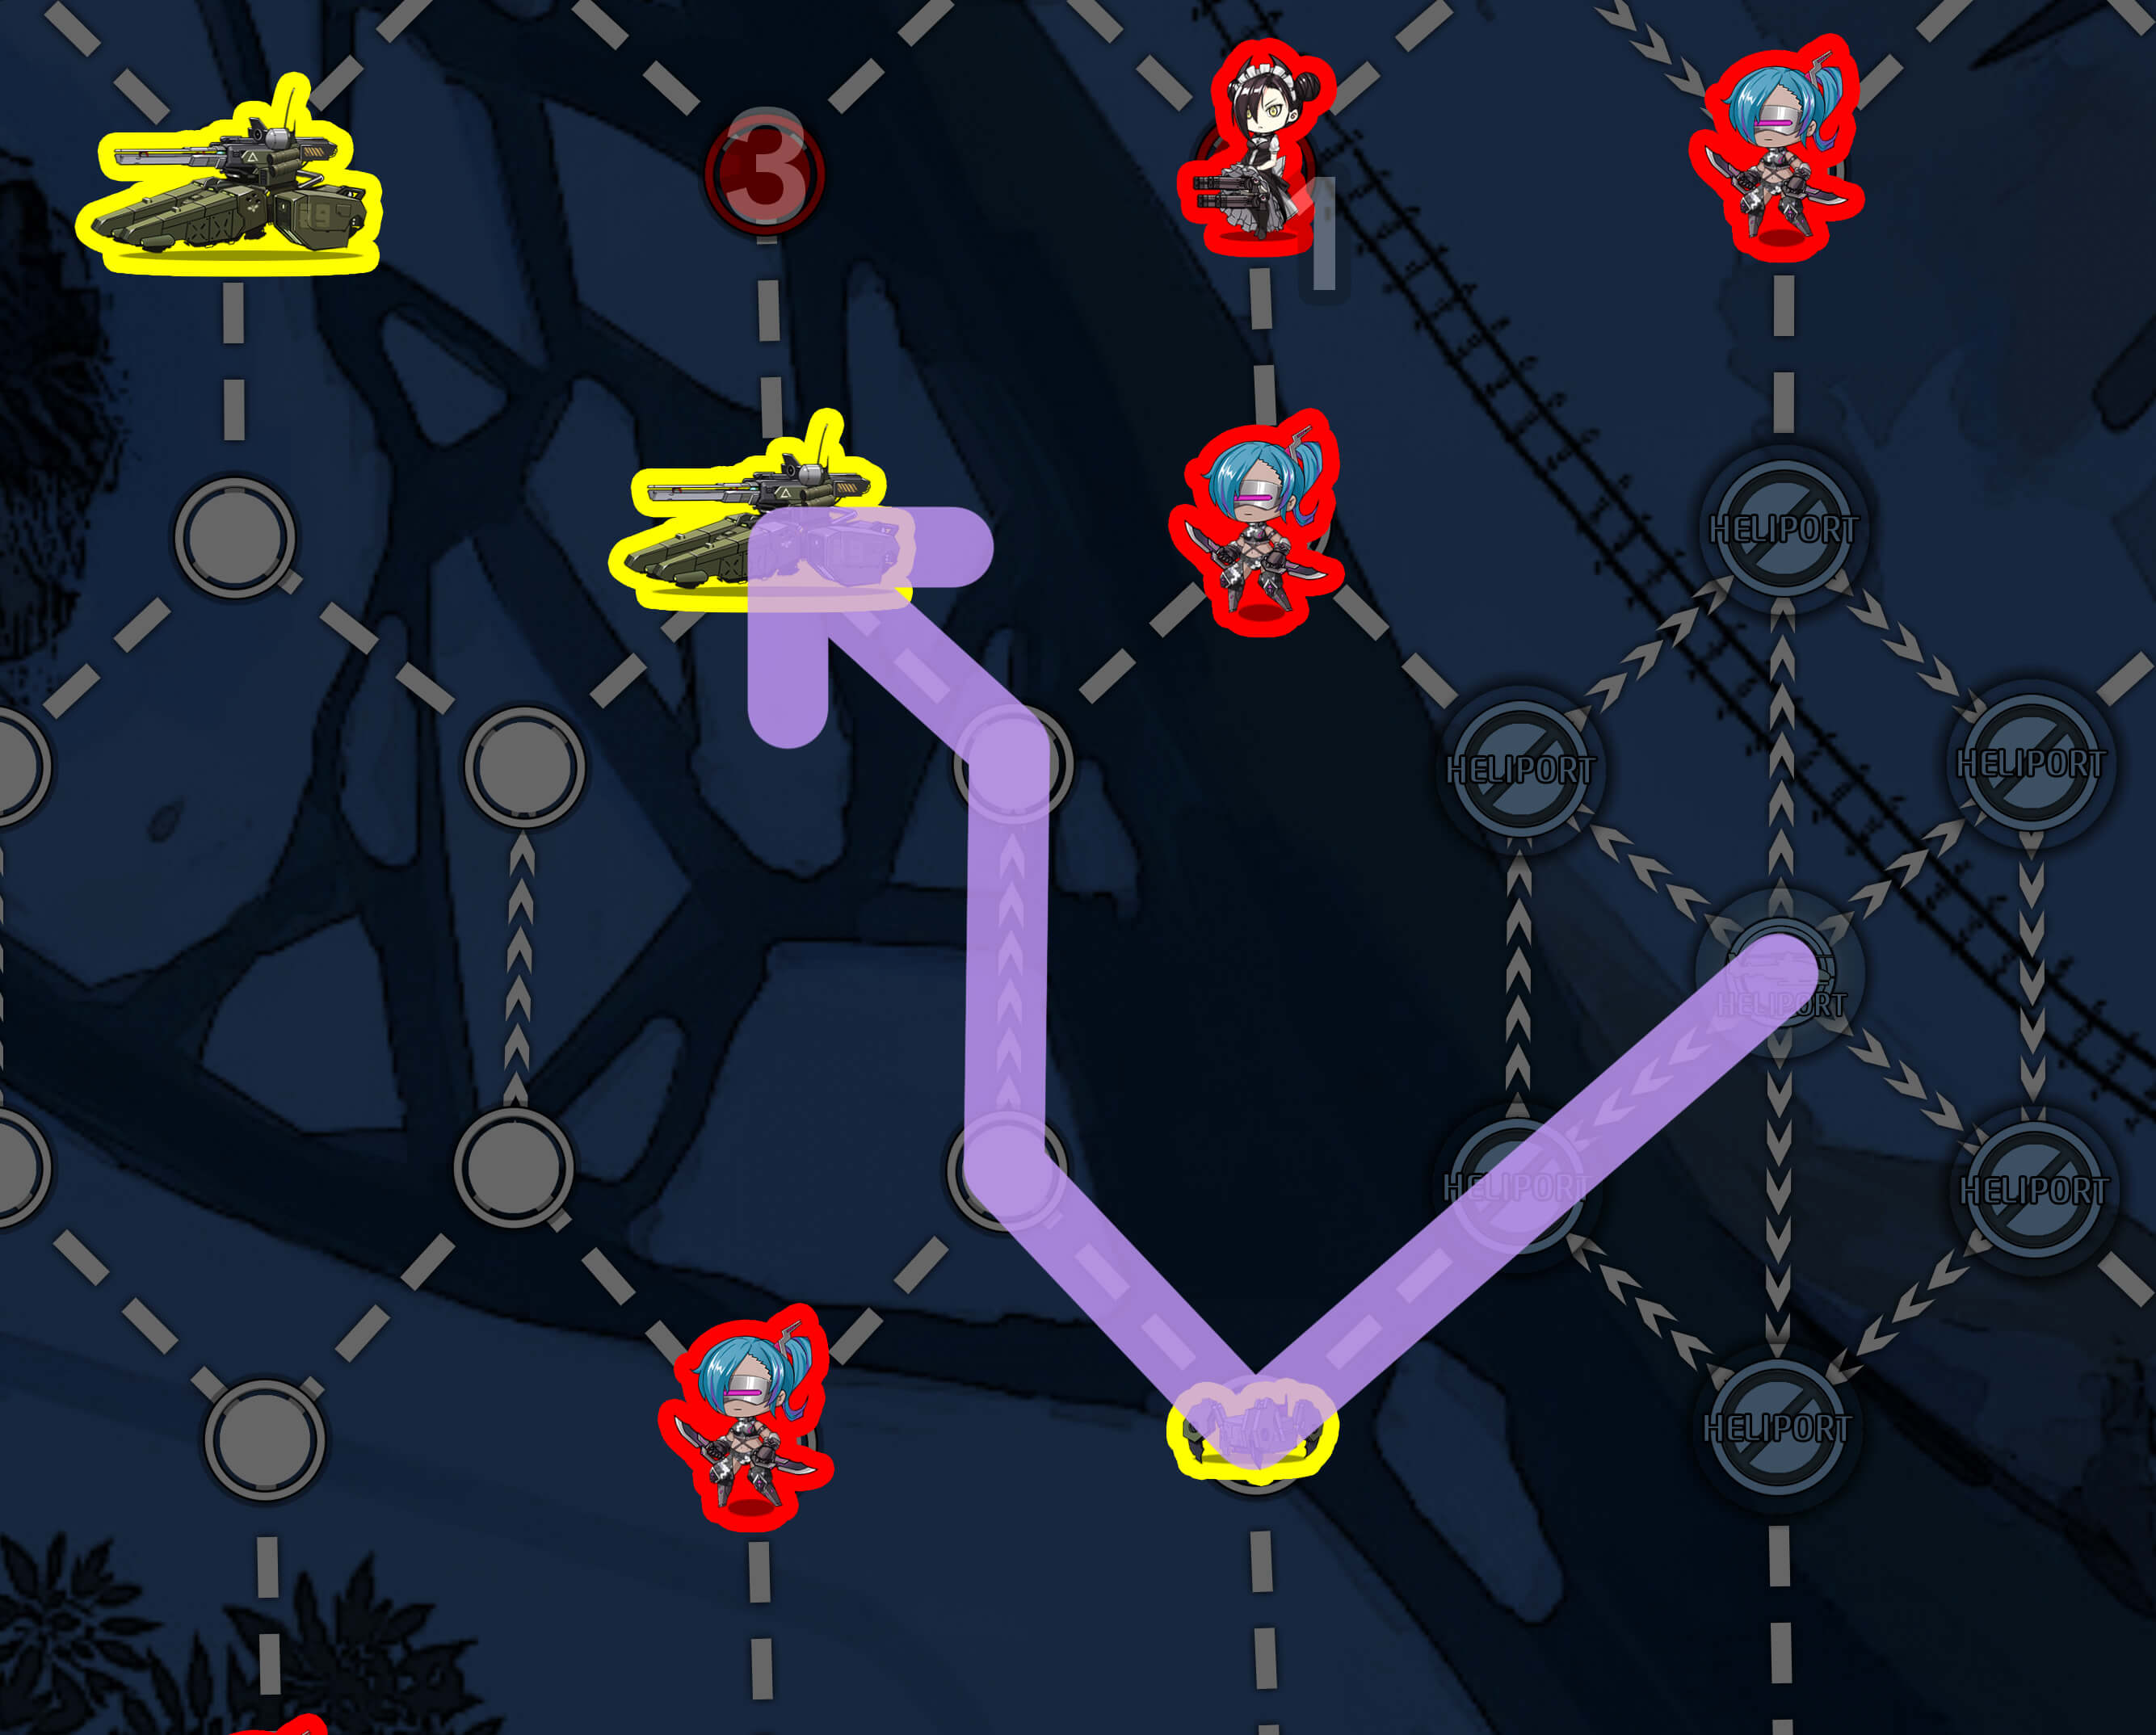 Route to test Gunboats in Hornet's Nest